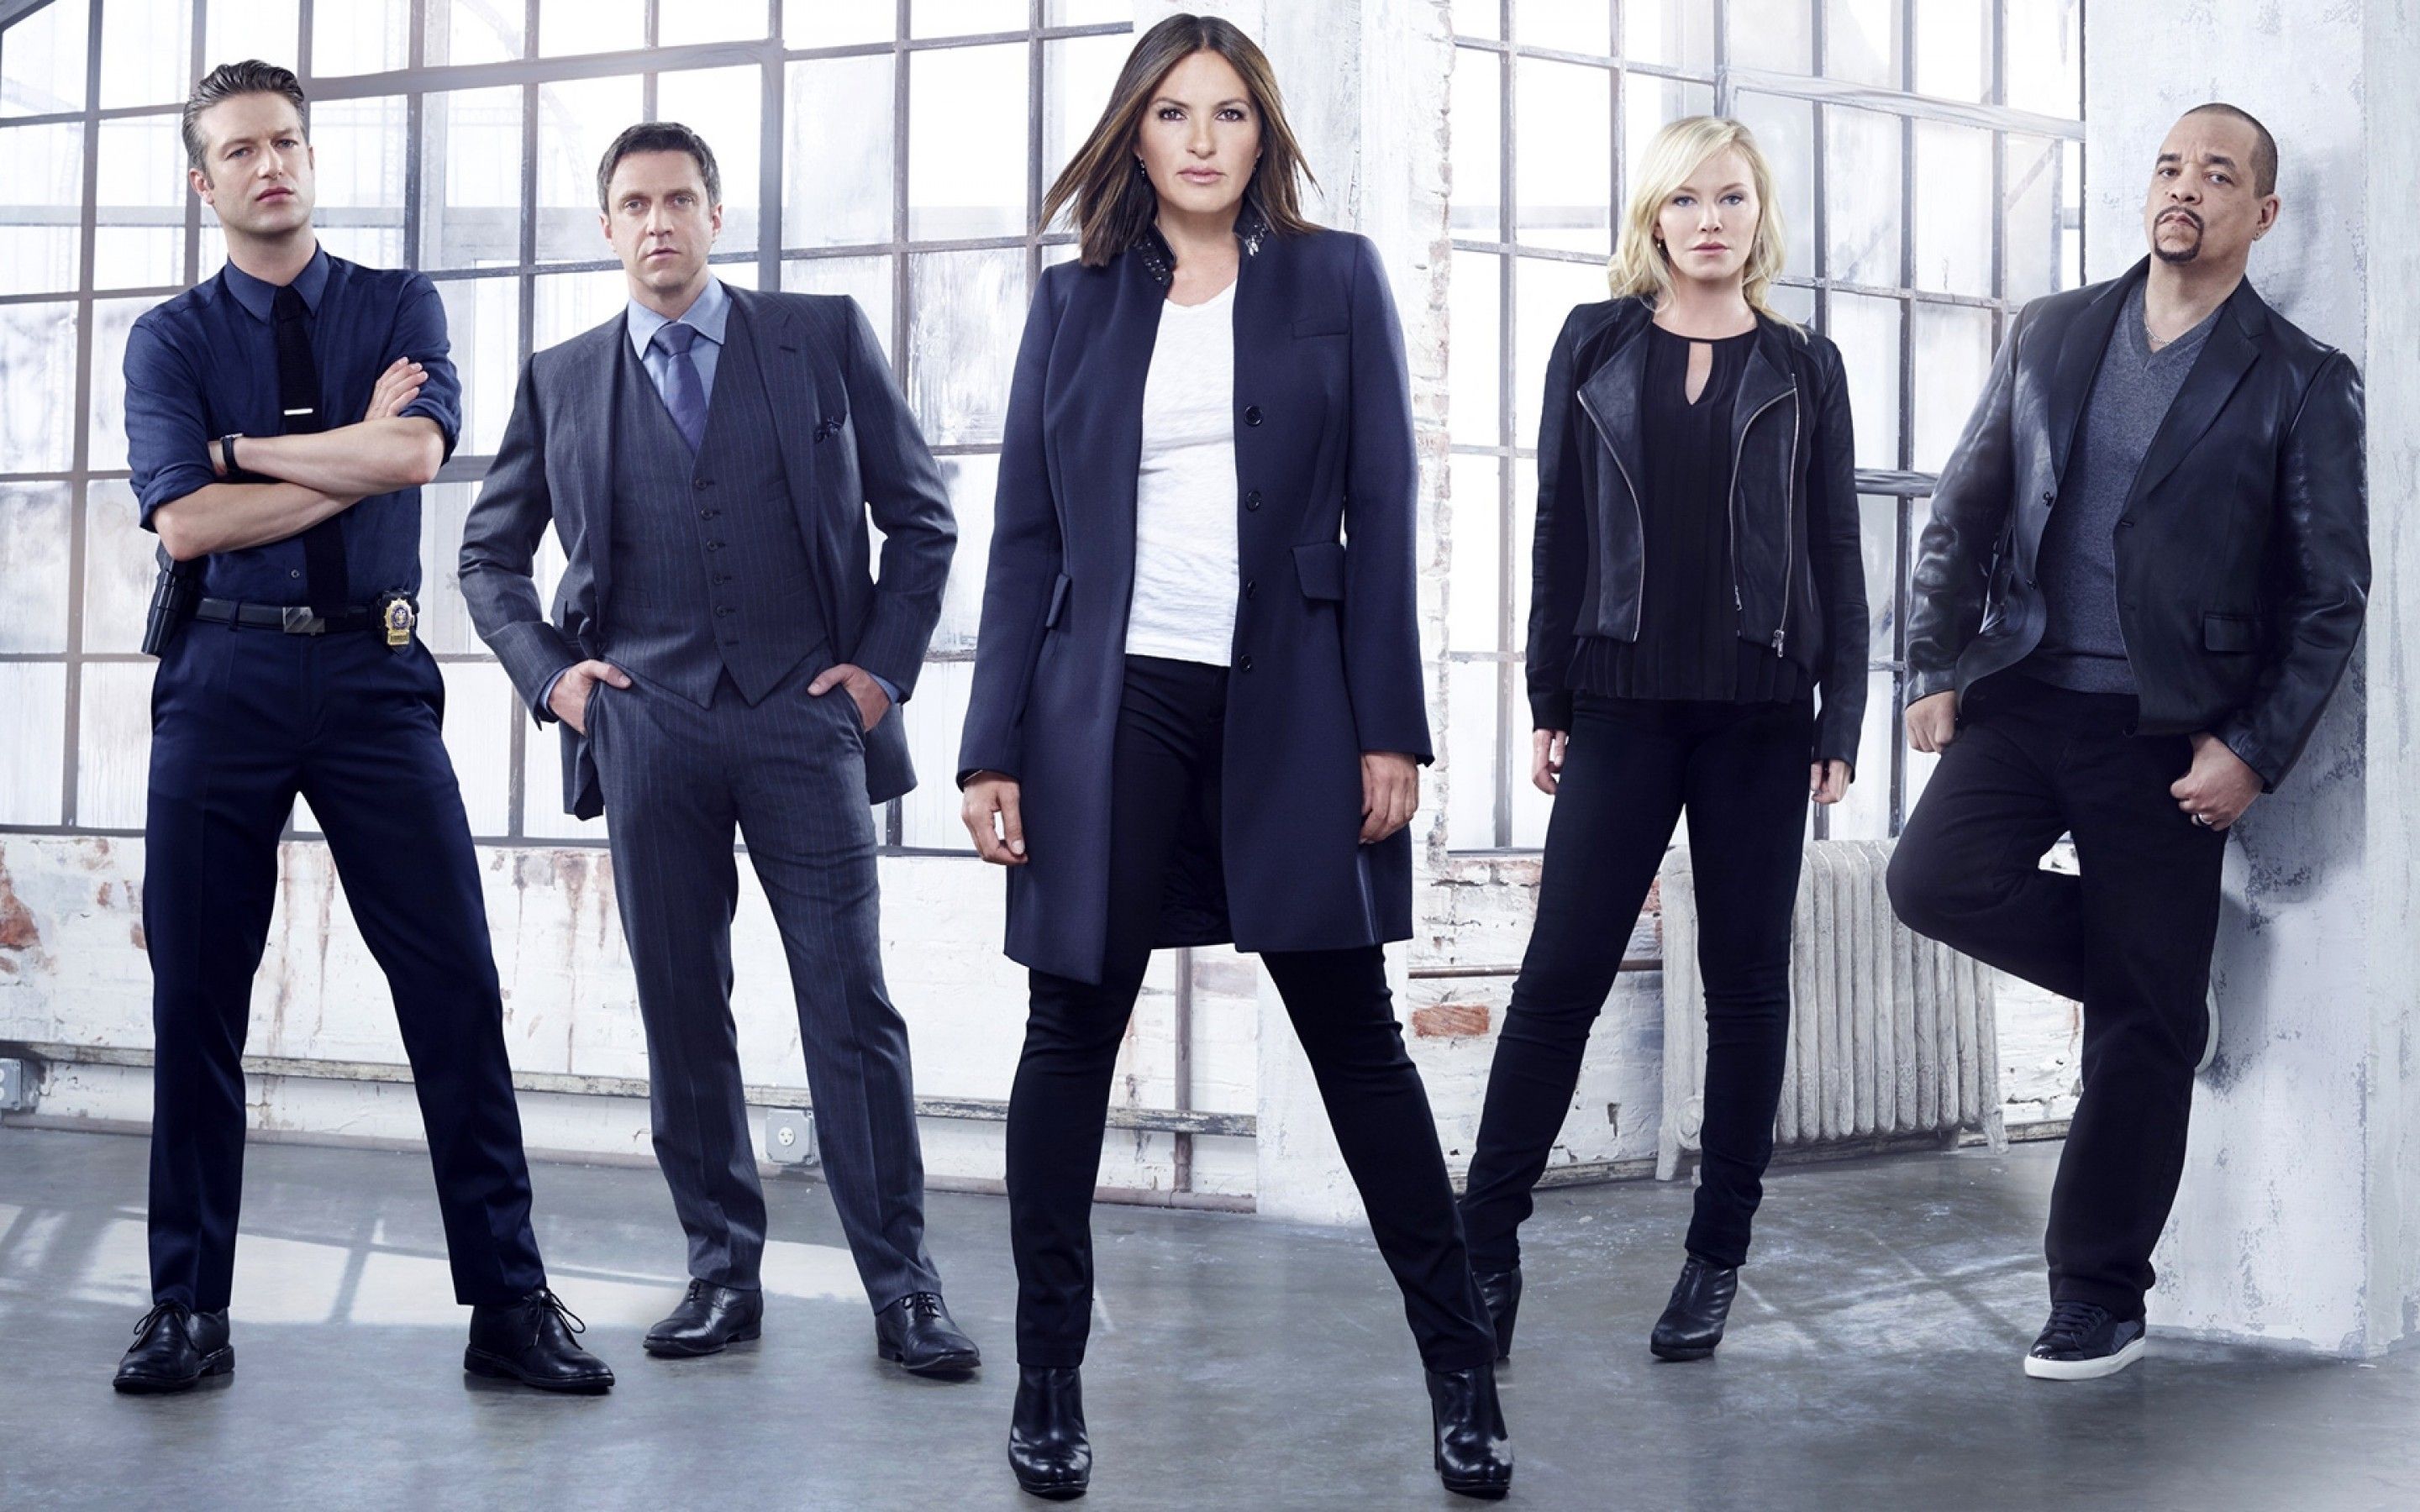 Download 2880x1800 Law And Order: Special Victims Unit, Tv Series